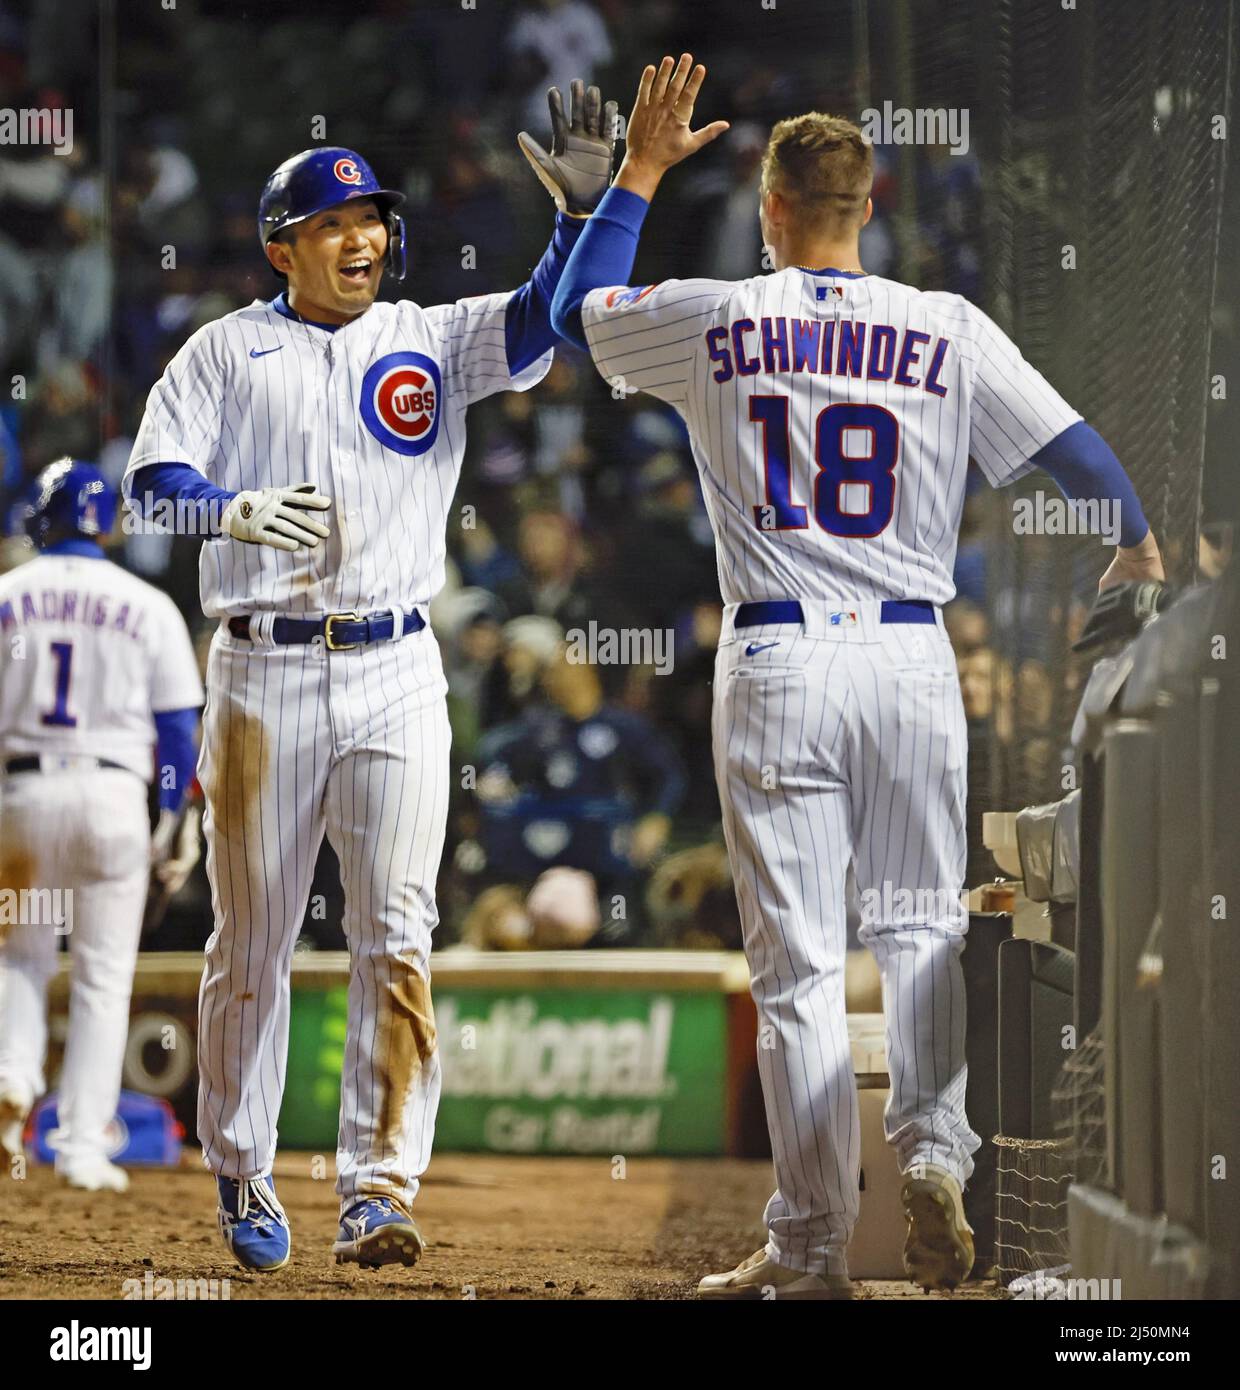 The Chicago Cubs' Seiya Suzuki (L) high fives Frank Schwindel after scoring  a run in the seventh inning of a baseball game against the Tampa Bay Rays  on April 18, 2022, at